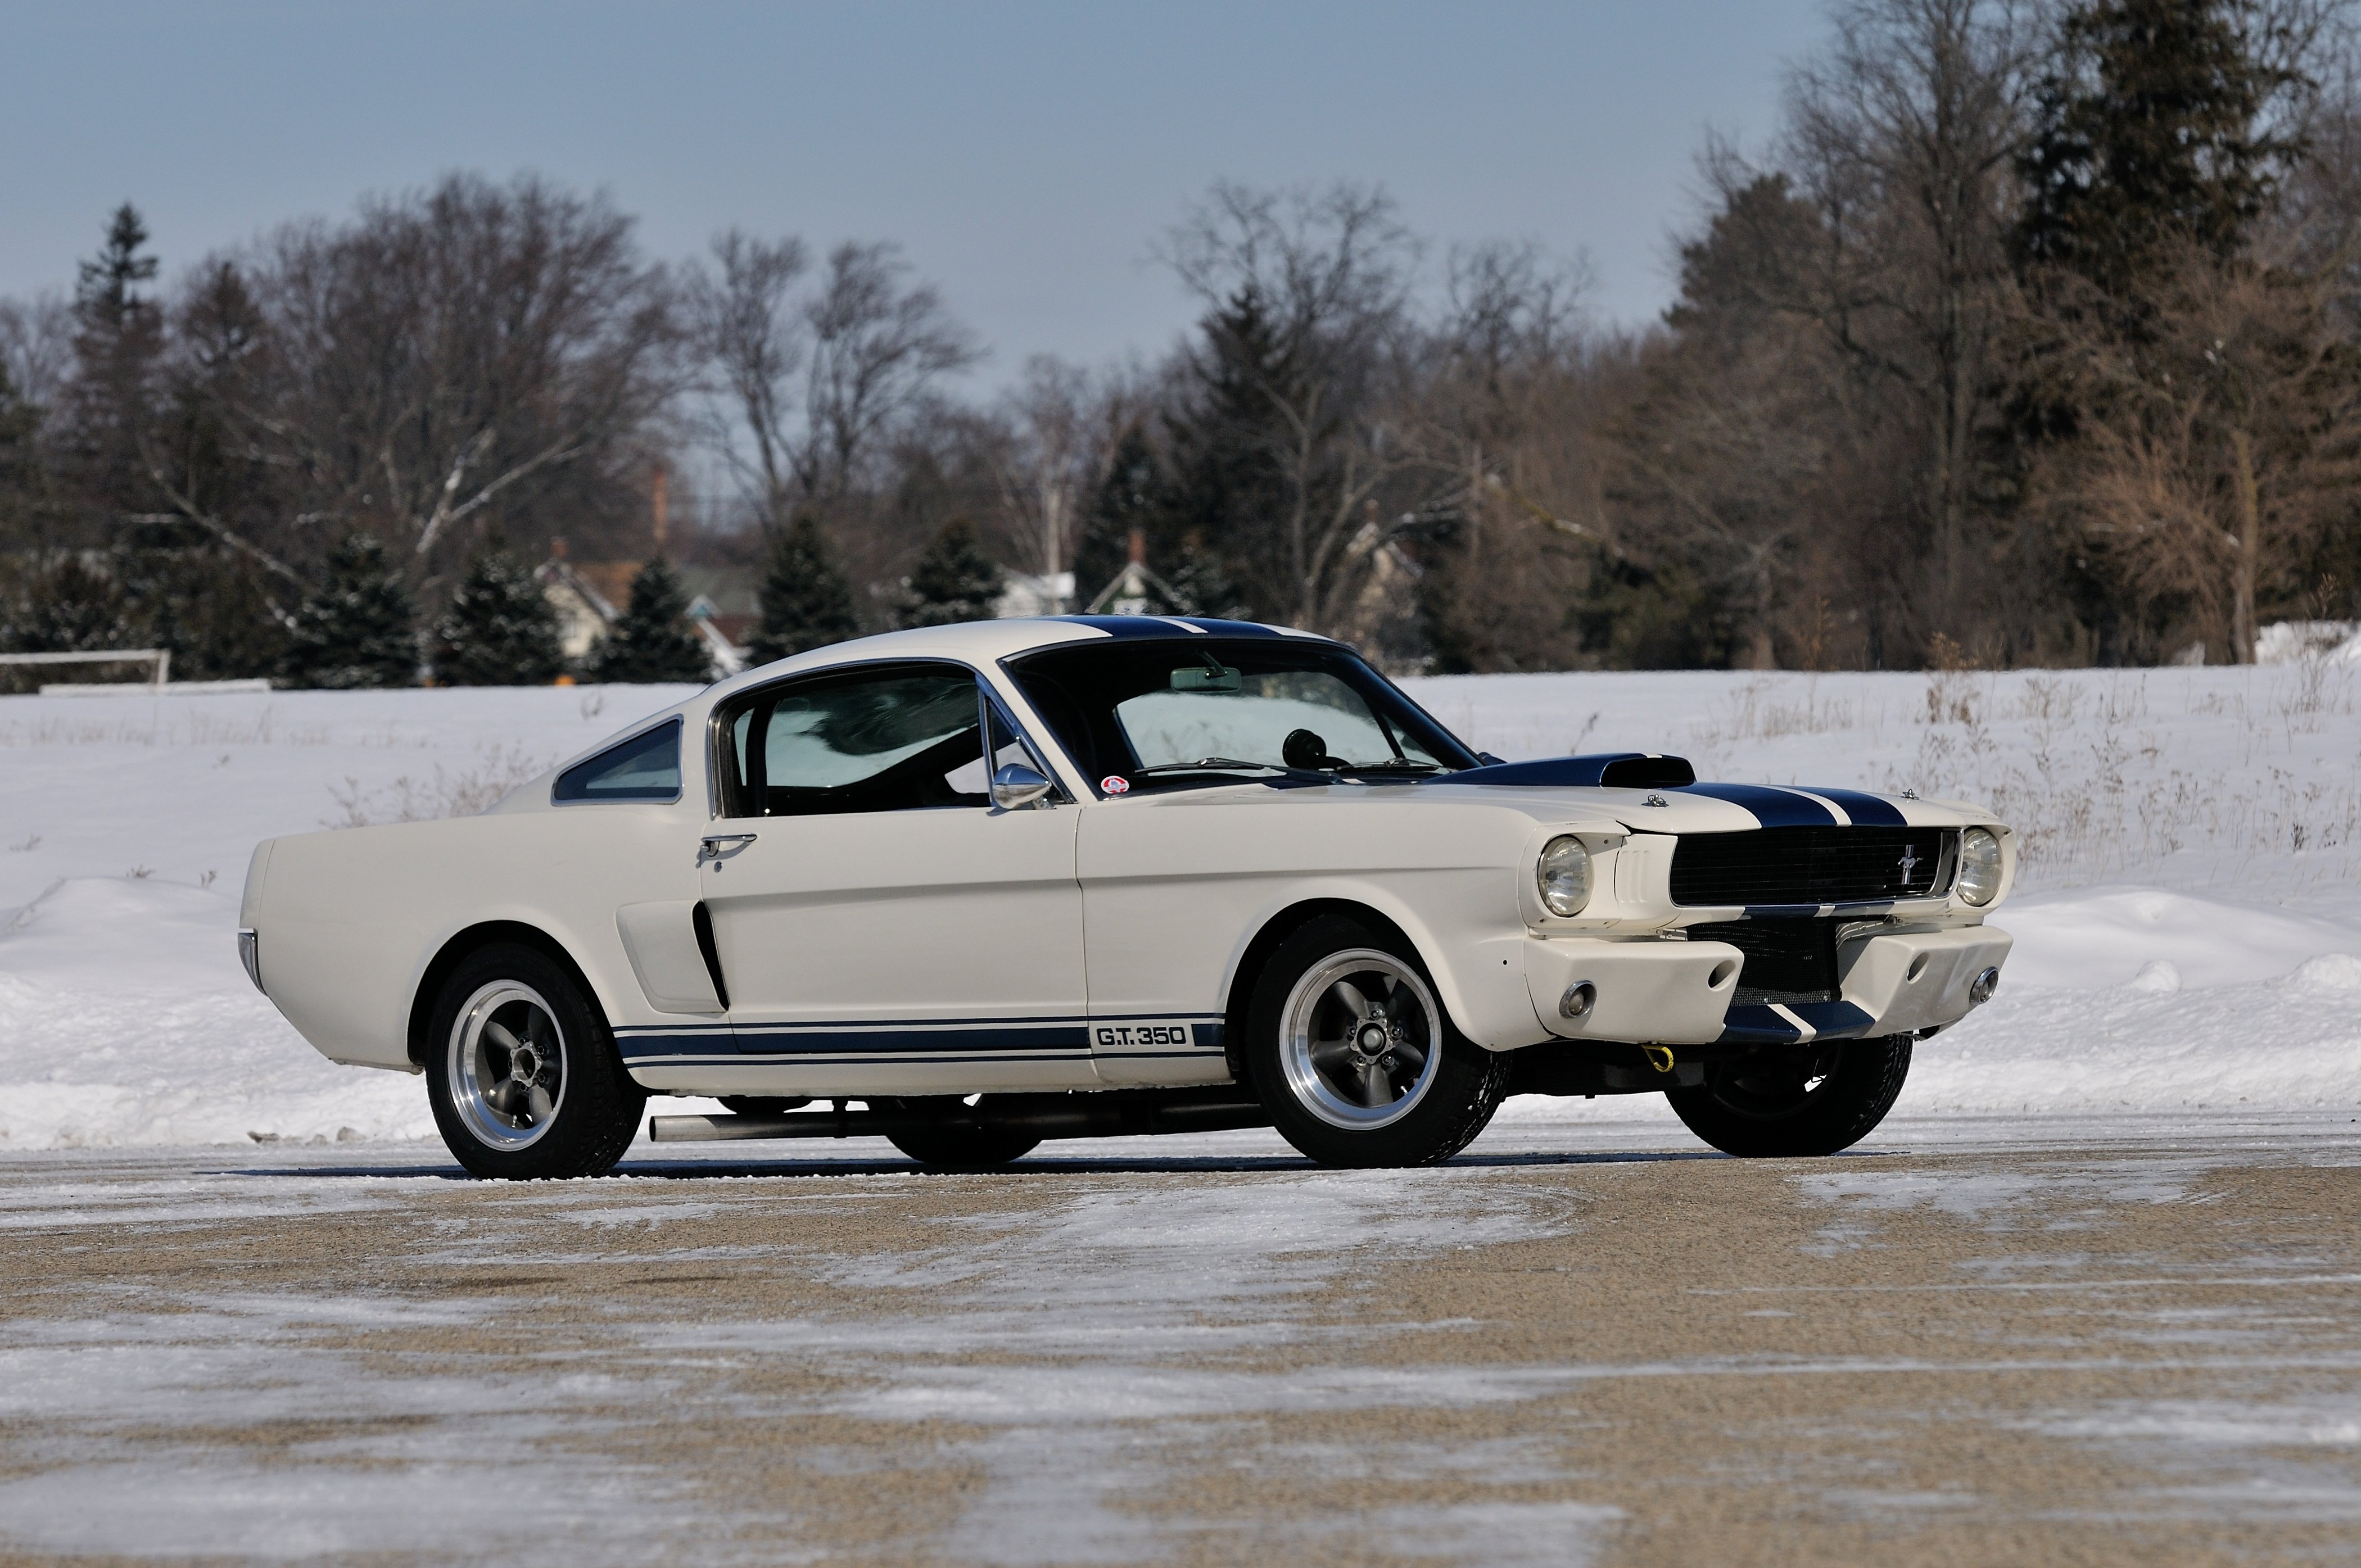 Ford Shelby Gt350 Fastback Muscle Car White Car Car 4200x2790